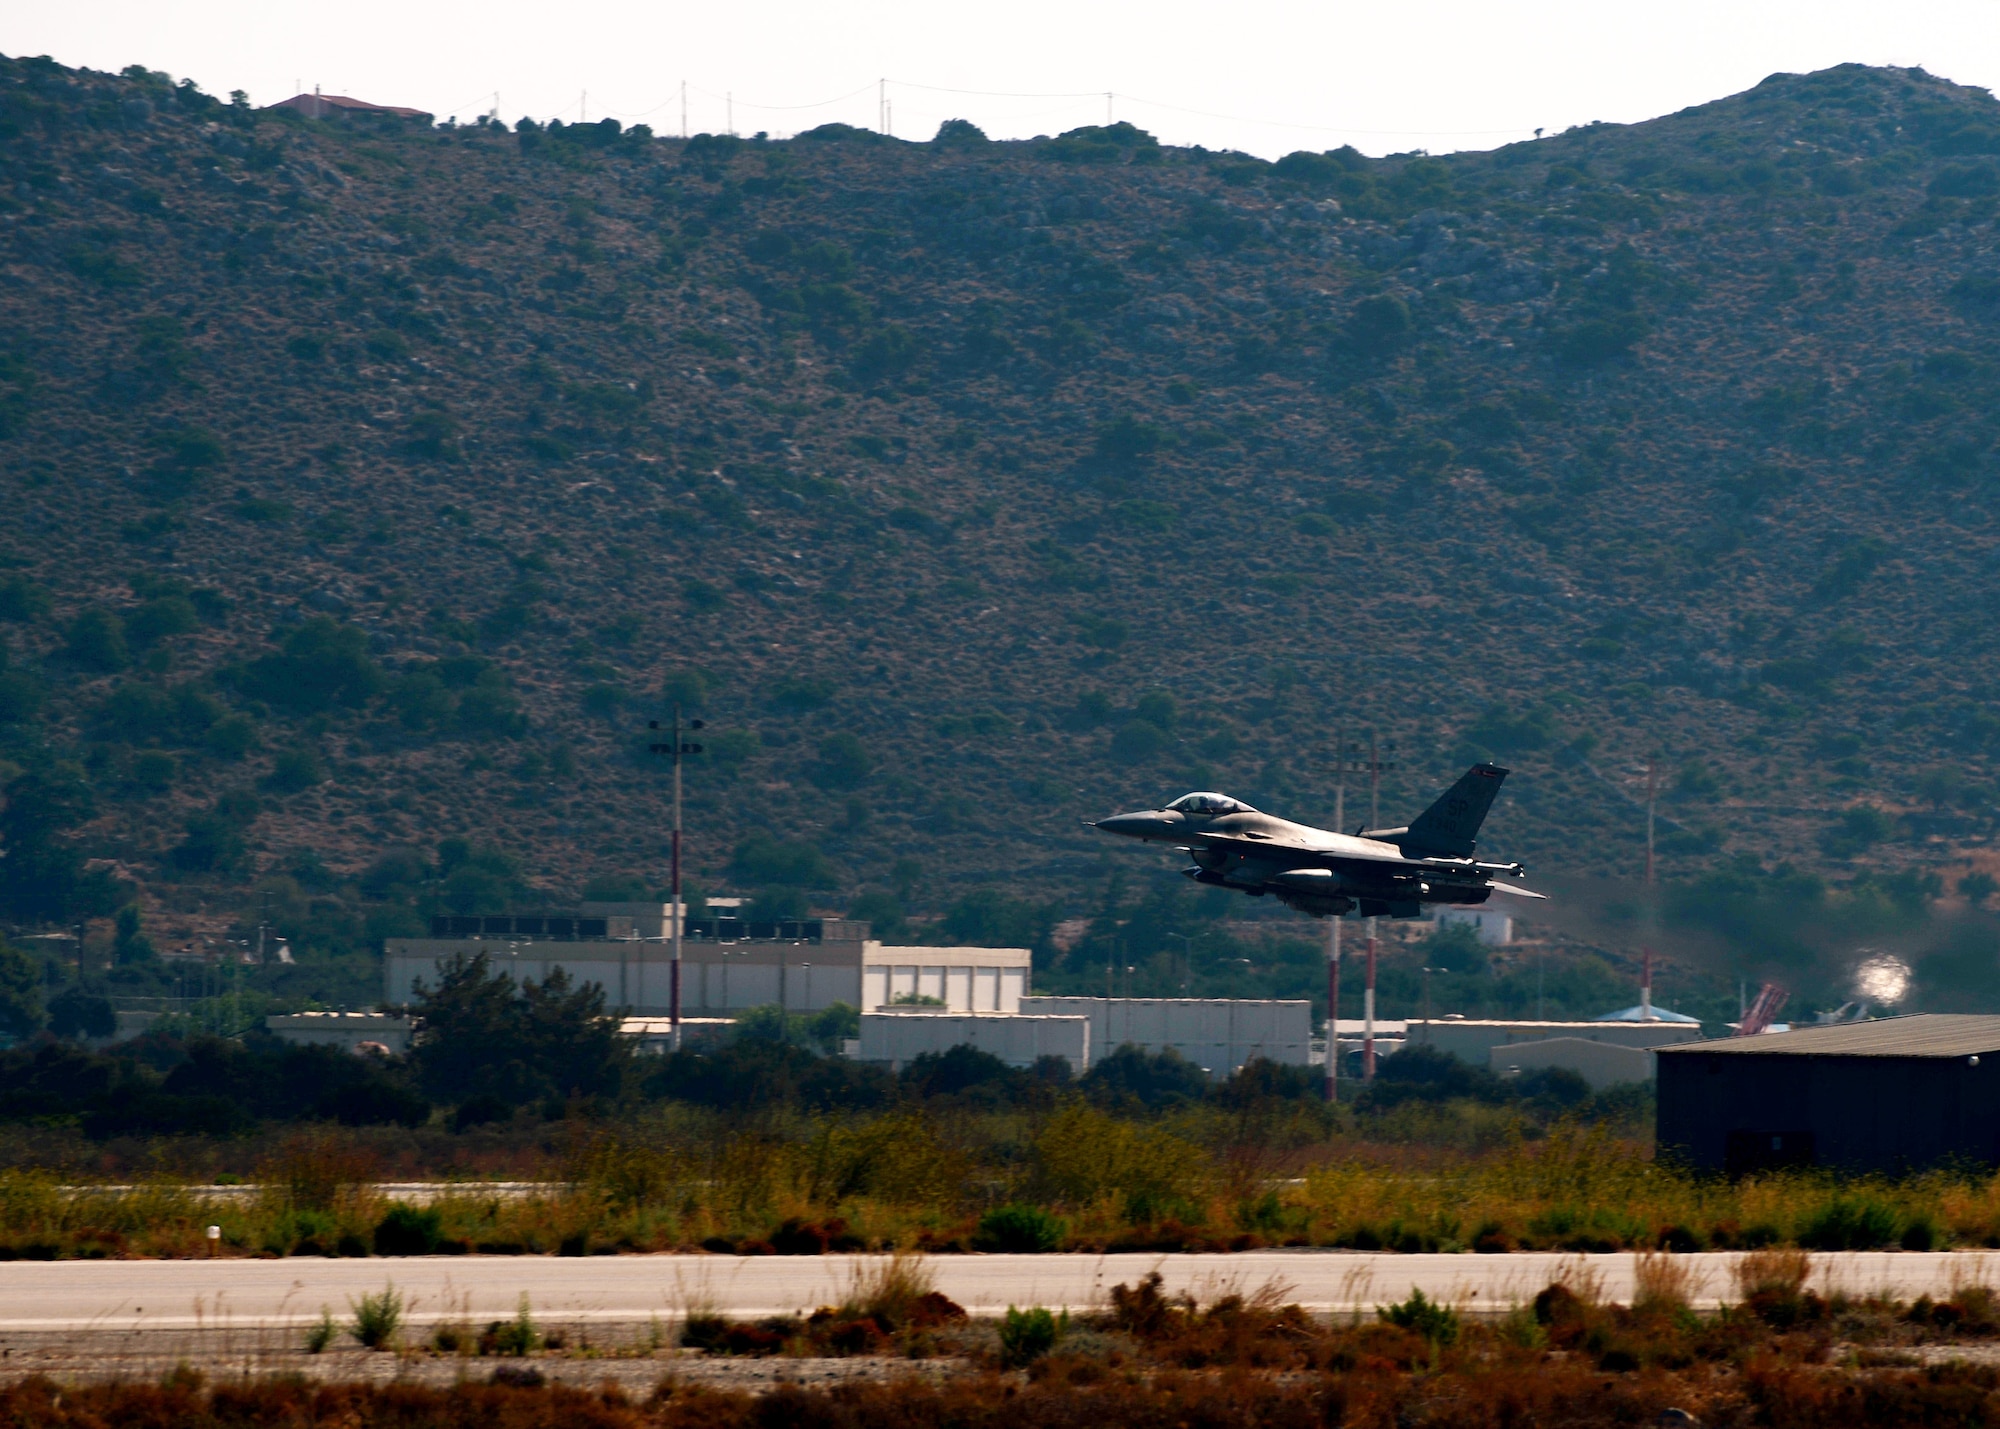 A U.S. Air Force F-16 Fighting Falcon fighter aircraft pilot takes off Aug. 12, 2014, from the flightline at Souda Bay, Greece, during a two-week training event with the Hellenic air force. The two nations partnered to enhance their breadth of air dominance. (U.S. Air Force photo by Staff Sgt. Daryl Knee/Released)